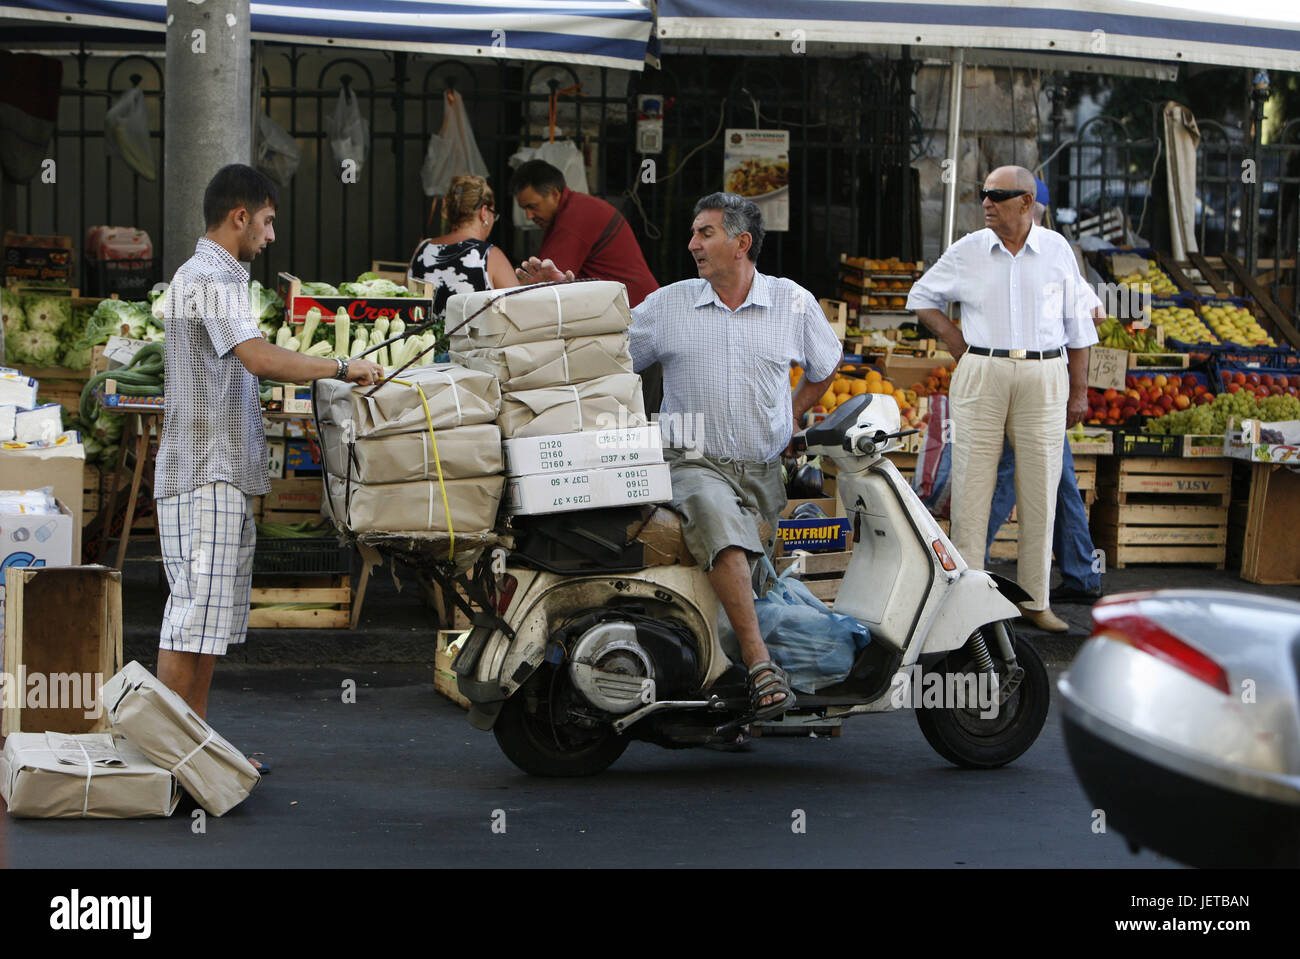 Italy, Sicily, Catania, Old Town, weekly market, street, motorbike driver, packages, advance, Southern Europe, lane, market, vegetable market, market stalls, sales, vegetables, fruit, choice, huge number, food, economy, retail trade, person, dealer, seller, motorbike driver, Stock Photo